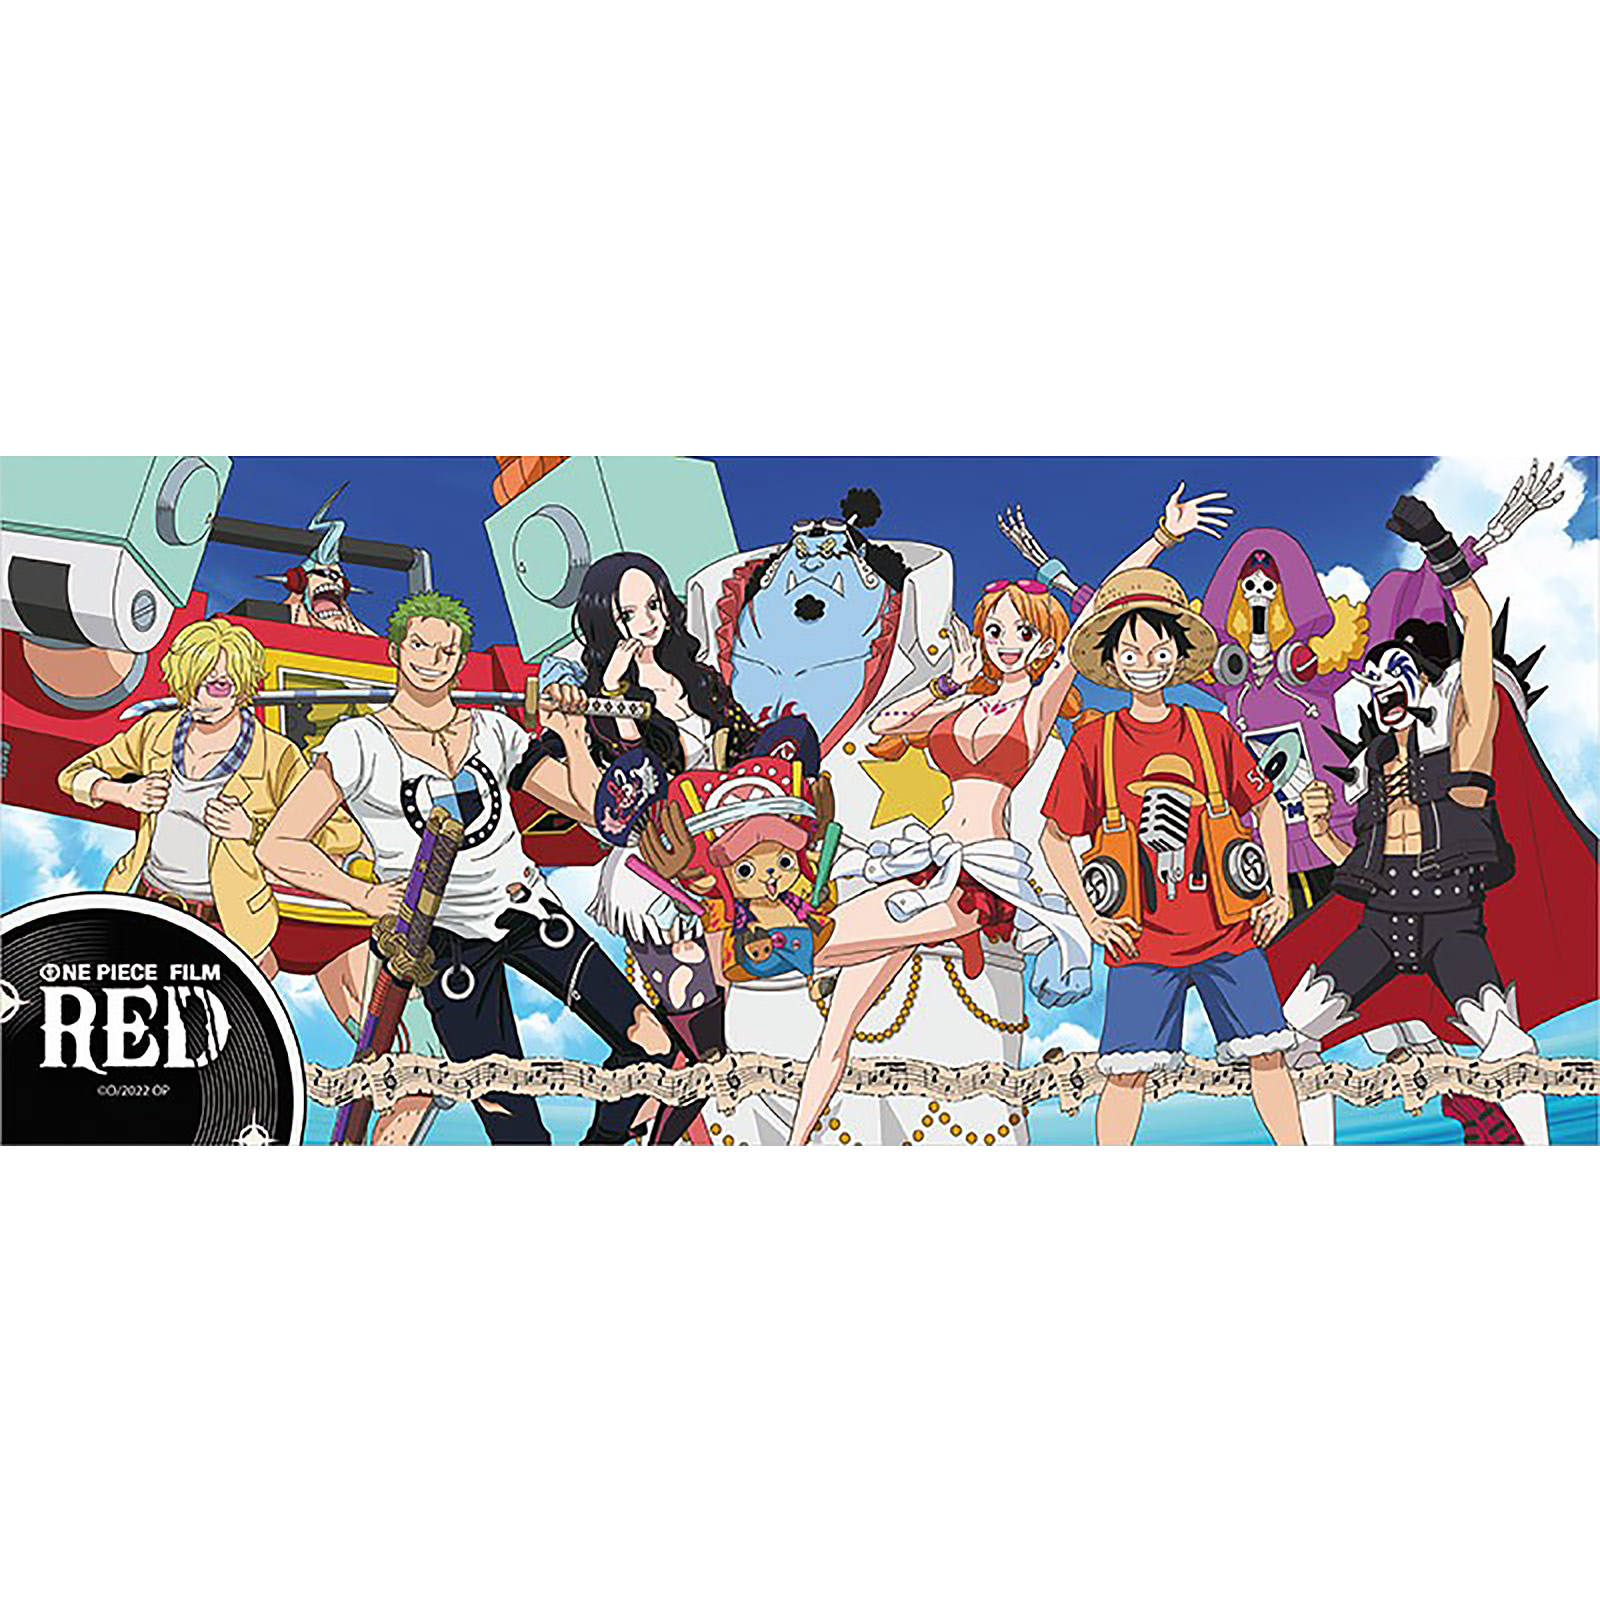 One Piece Red - Concert Mok